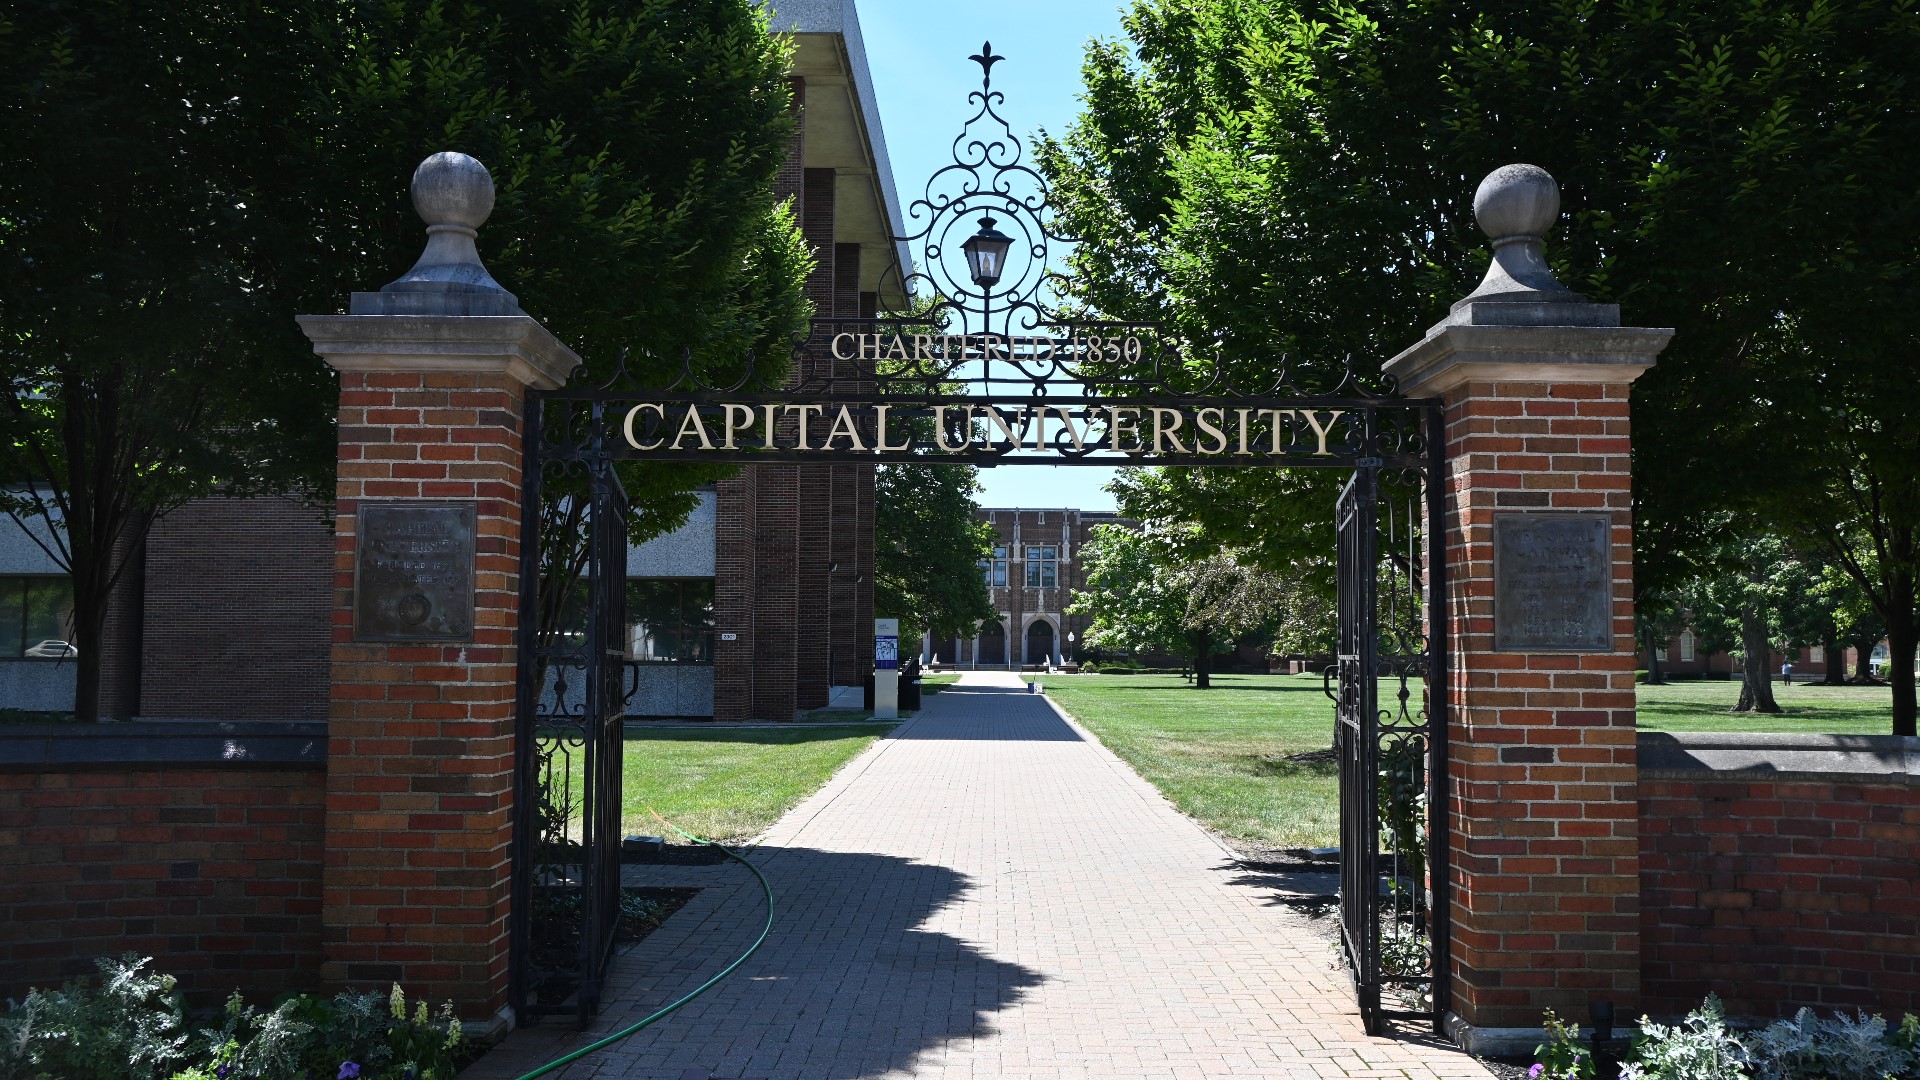 The online program is a collaboration with Capital University, Columbus State Community College and Columbus City Schools.